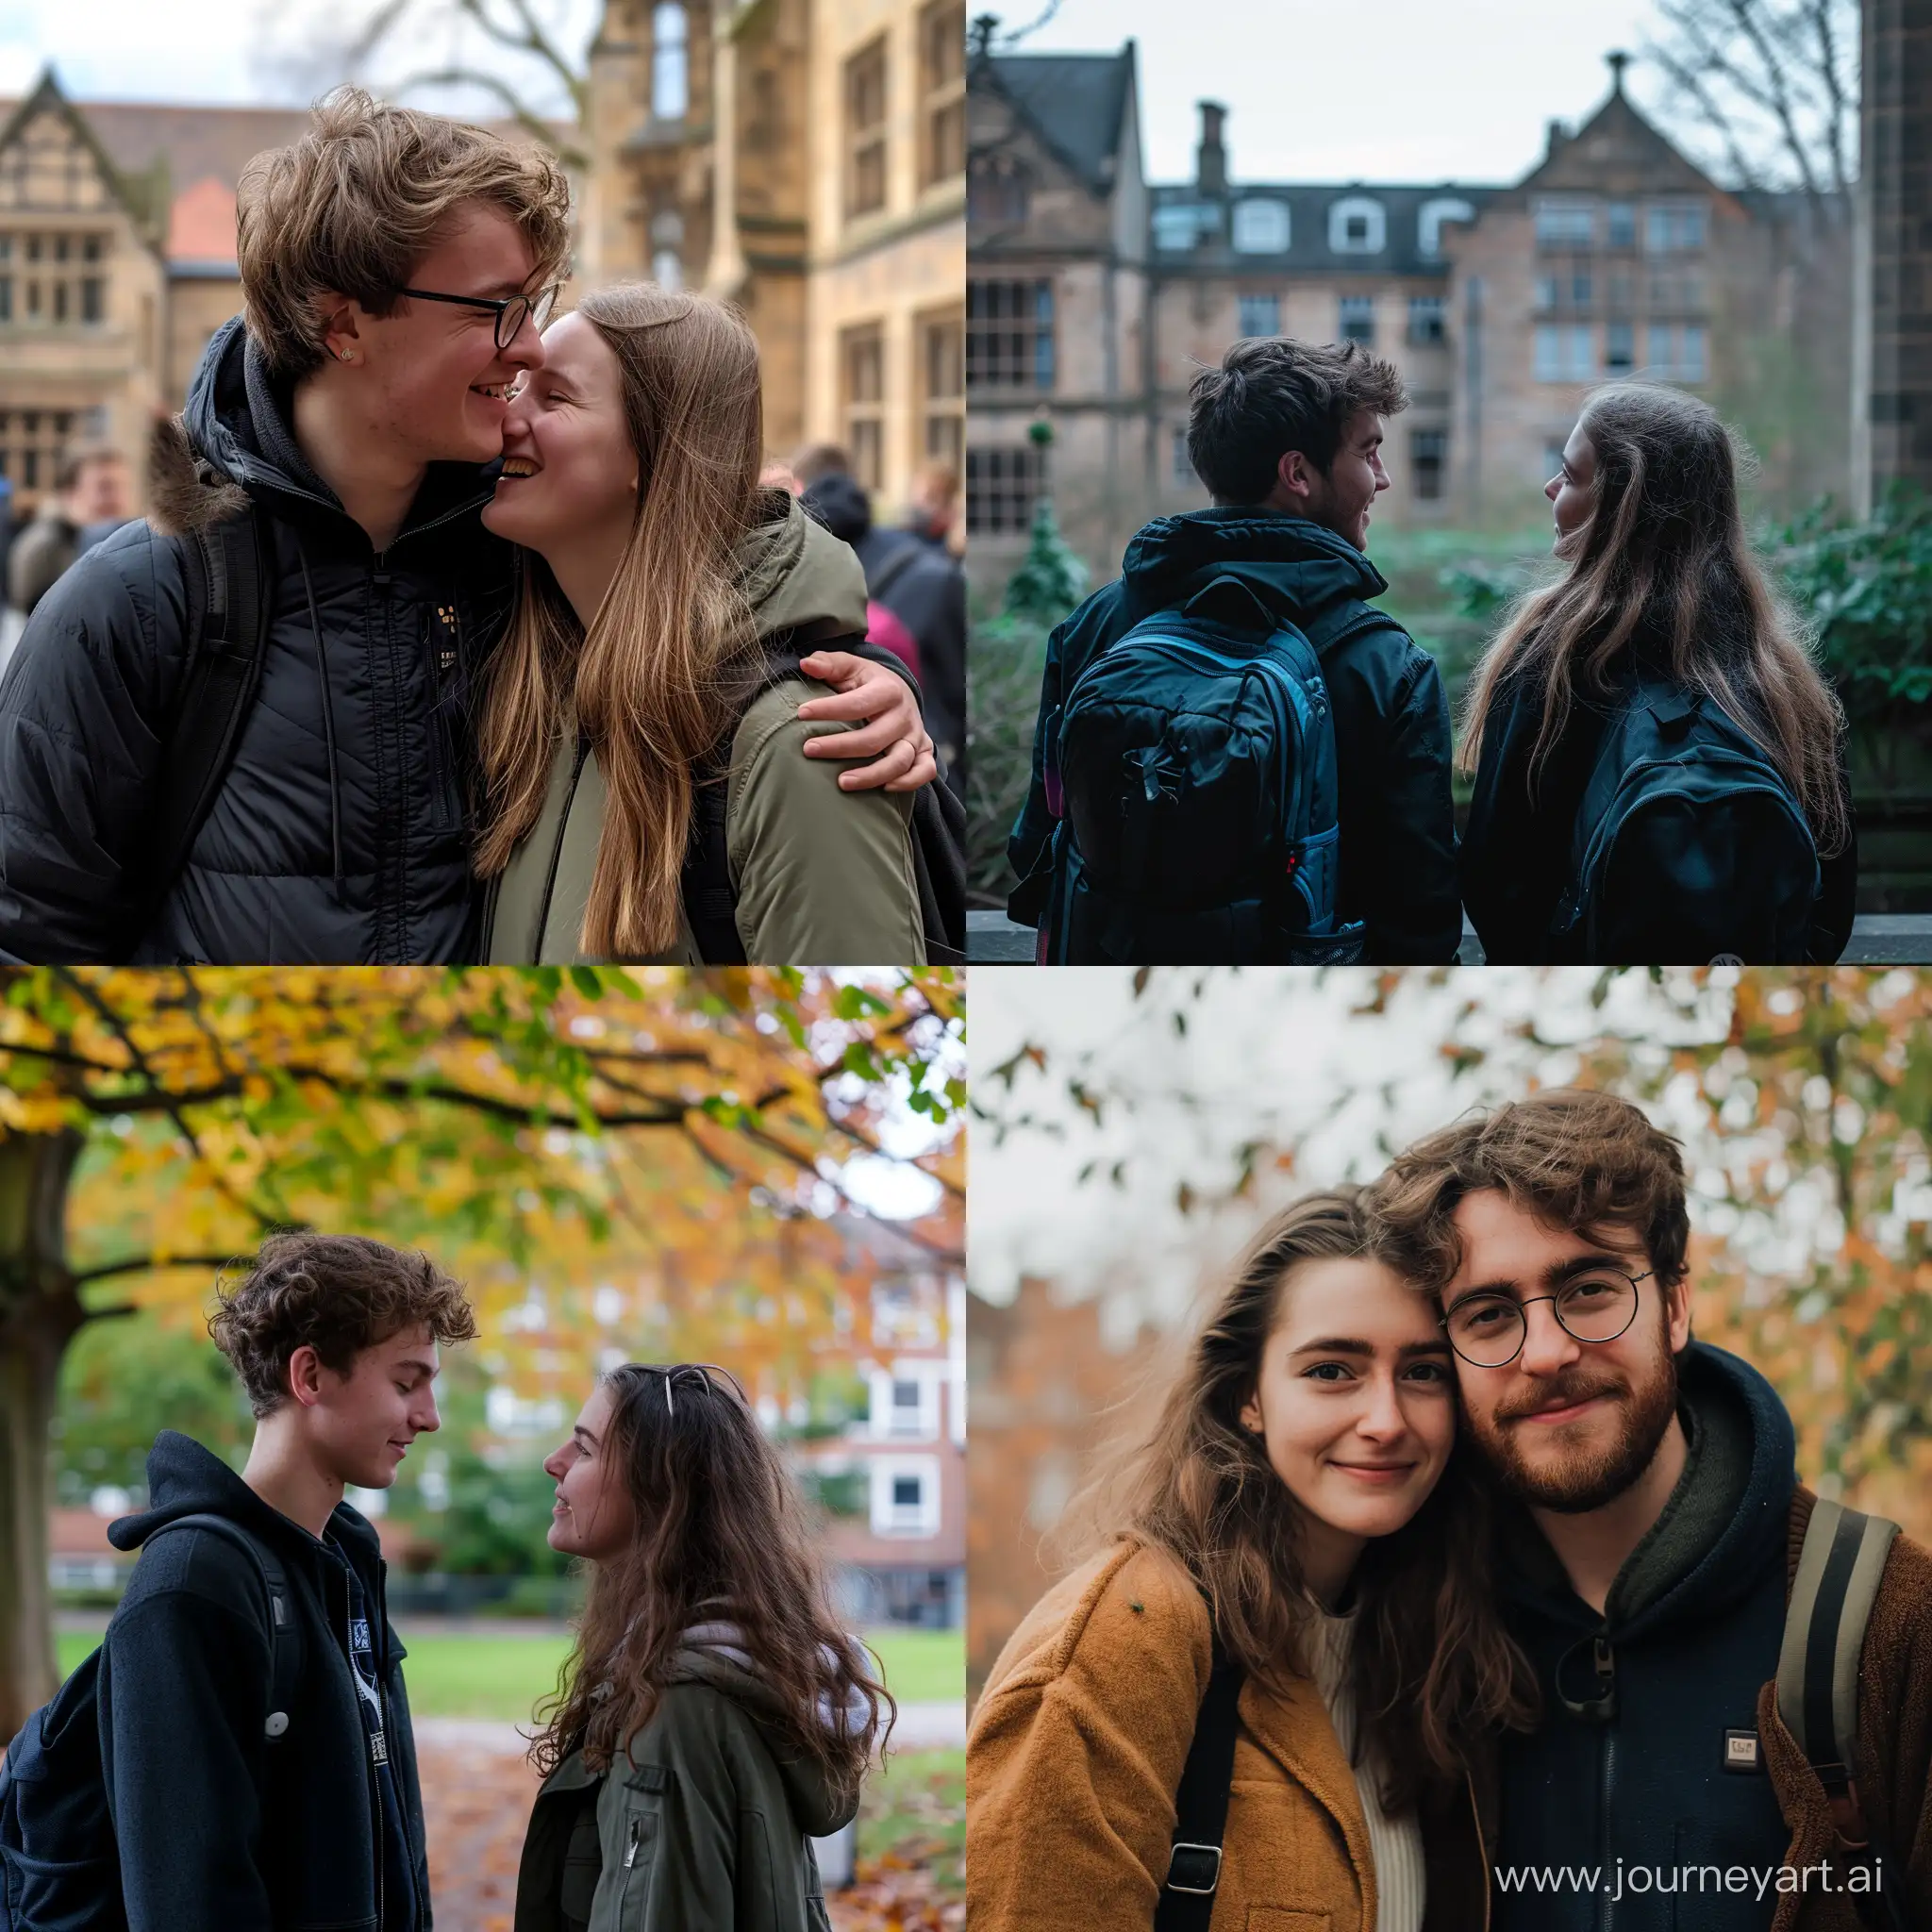 Getting into a relationship with my girlfriend at university